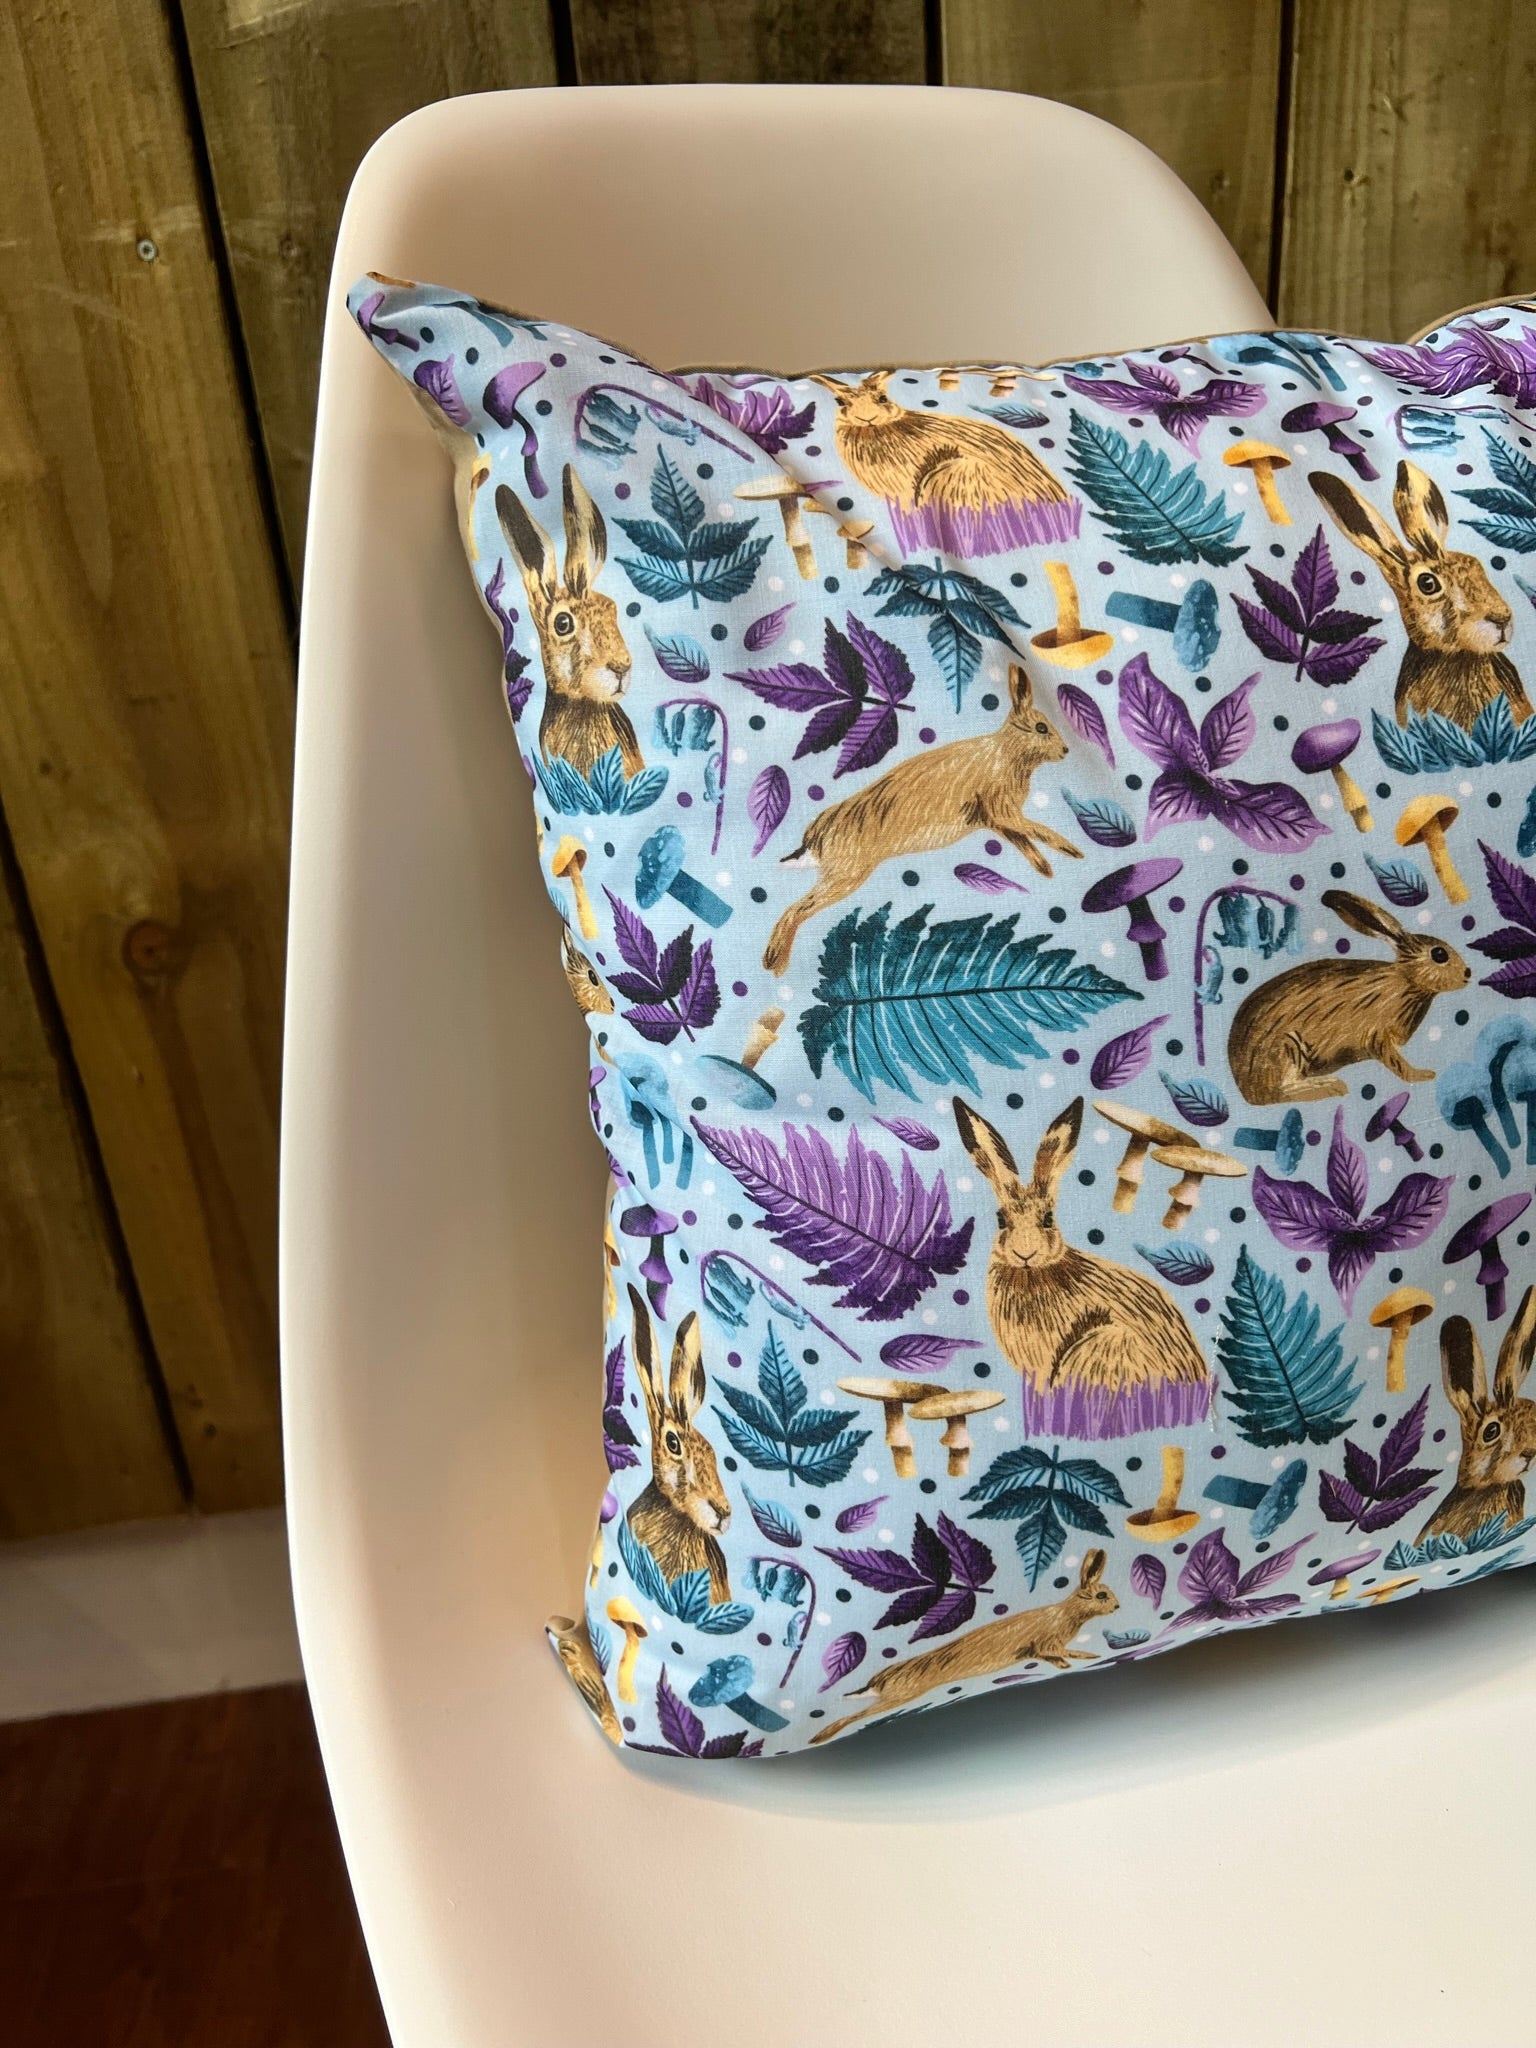 Great as a rabbit gift, our hare cushion cover shows the species in a pattern with a blue background. This decorative pillow for a sofa is great as a gift for home decor.